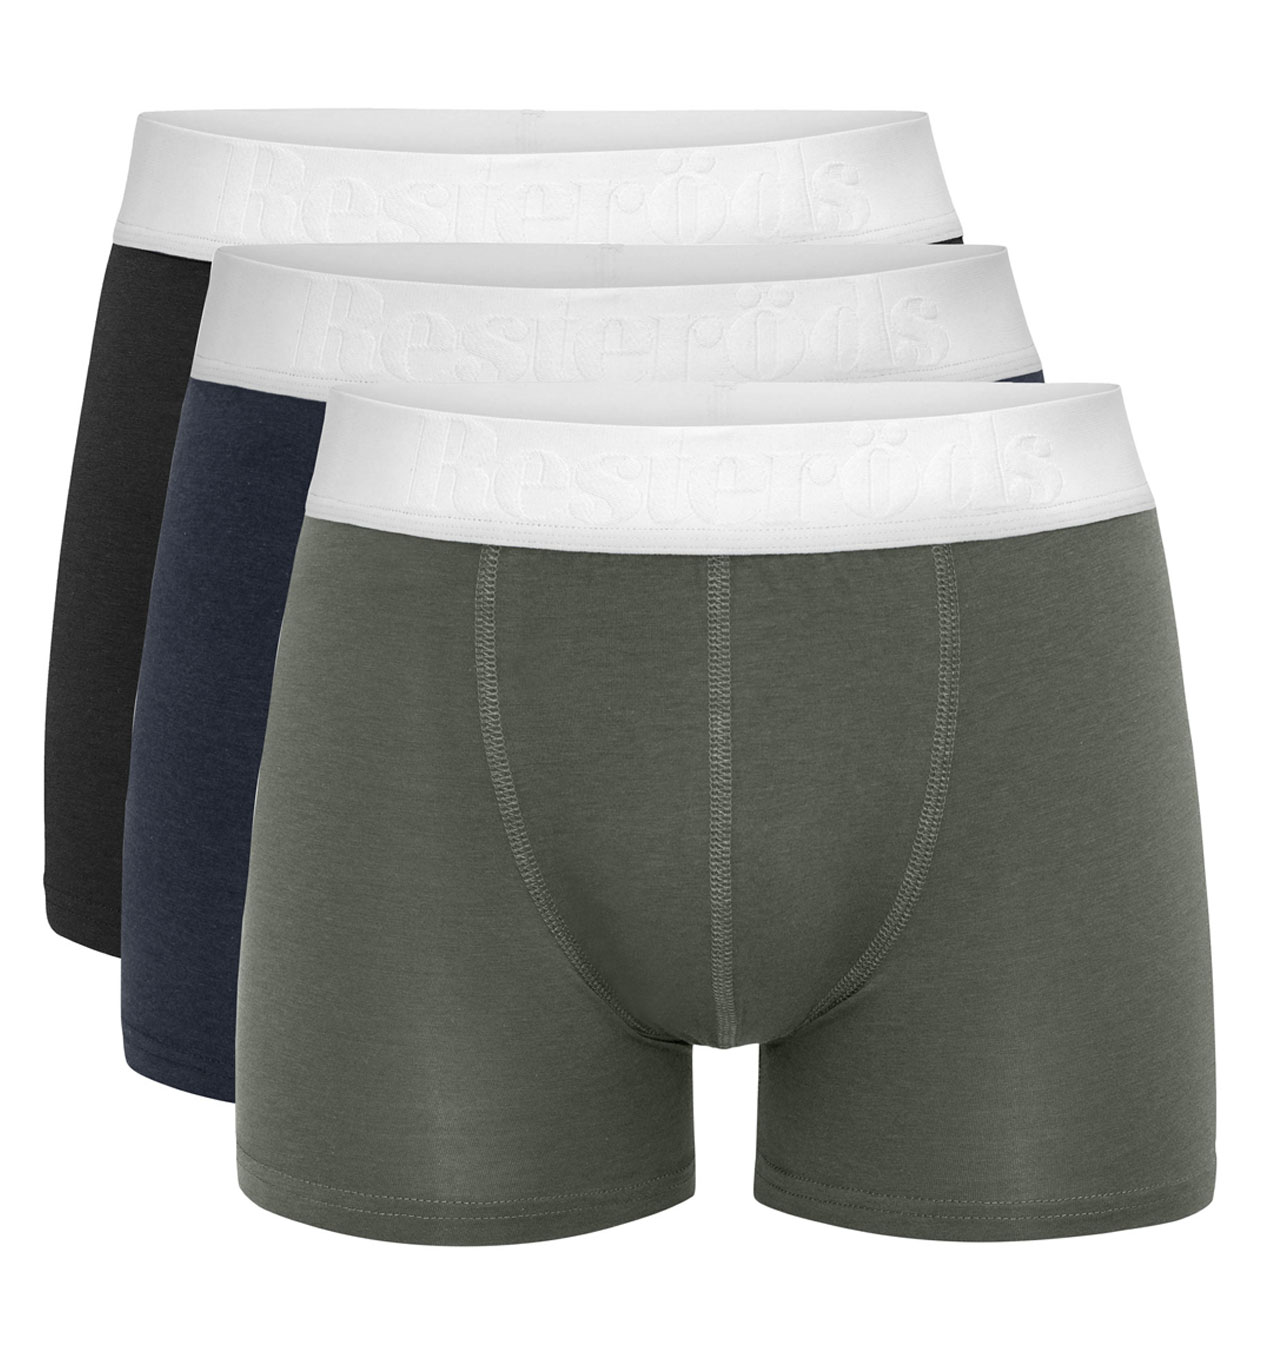 Resterods---Gunnar-Bamboo-Boxer-Shorts-3-pack---Mix-Colors-1